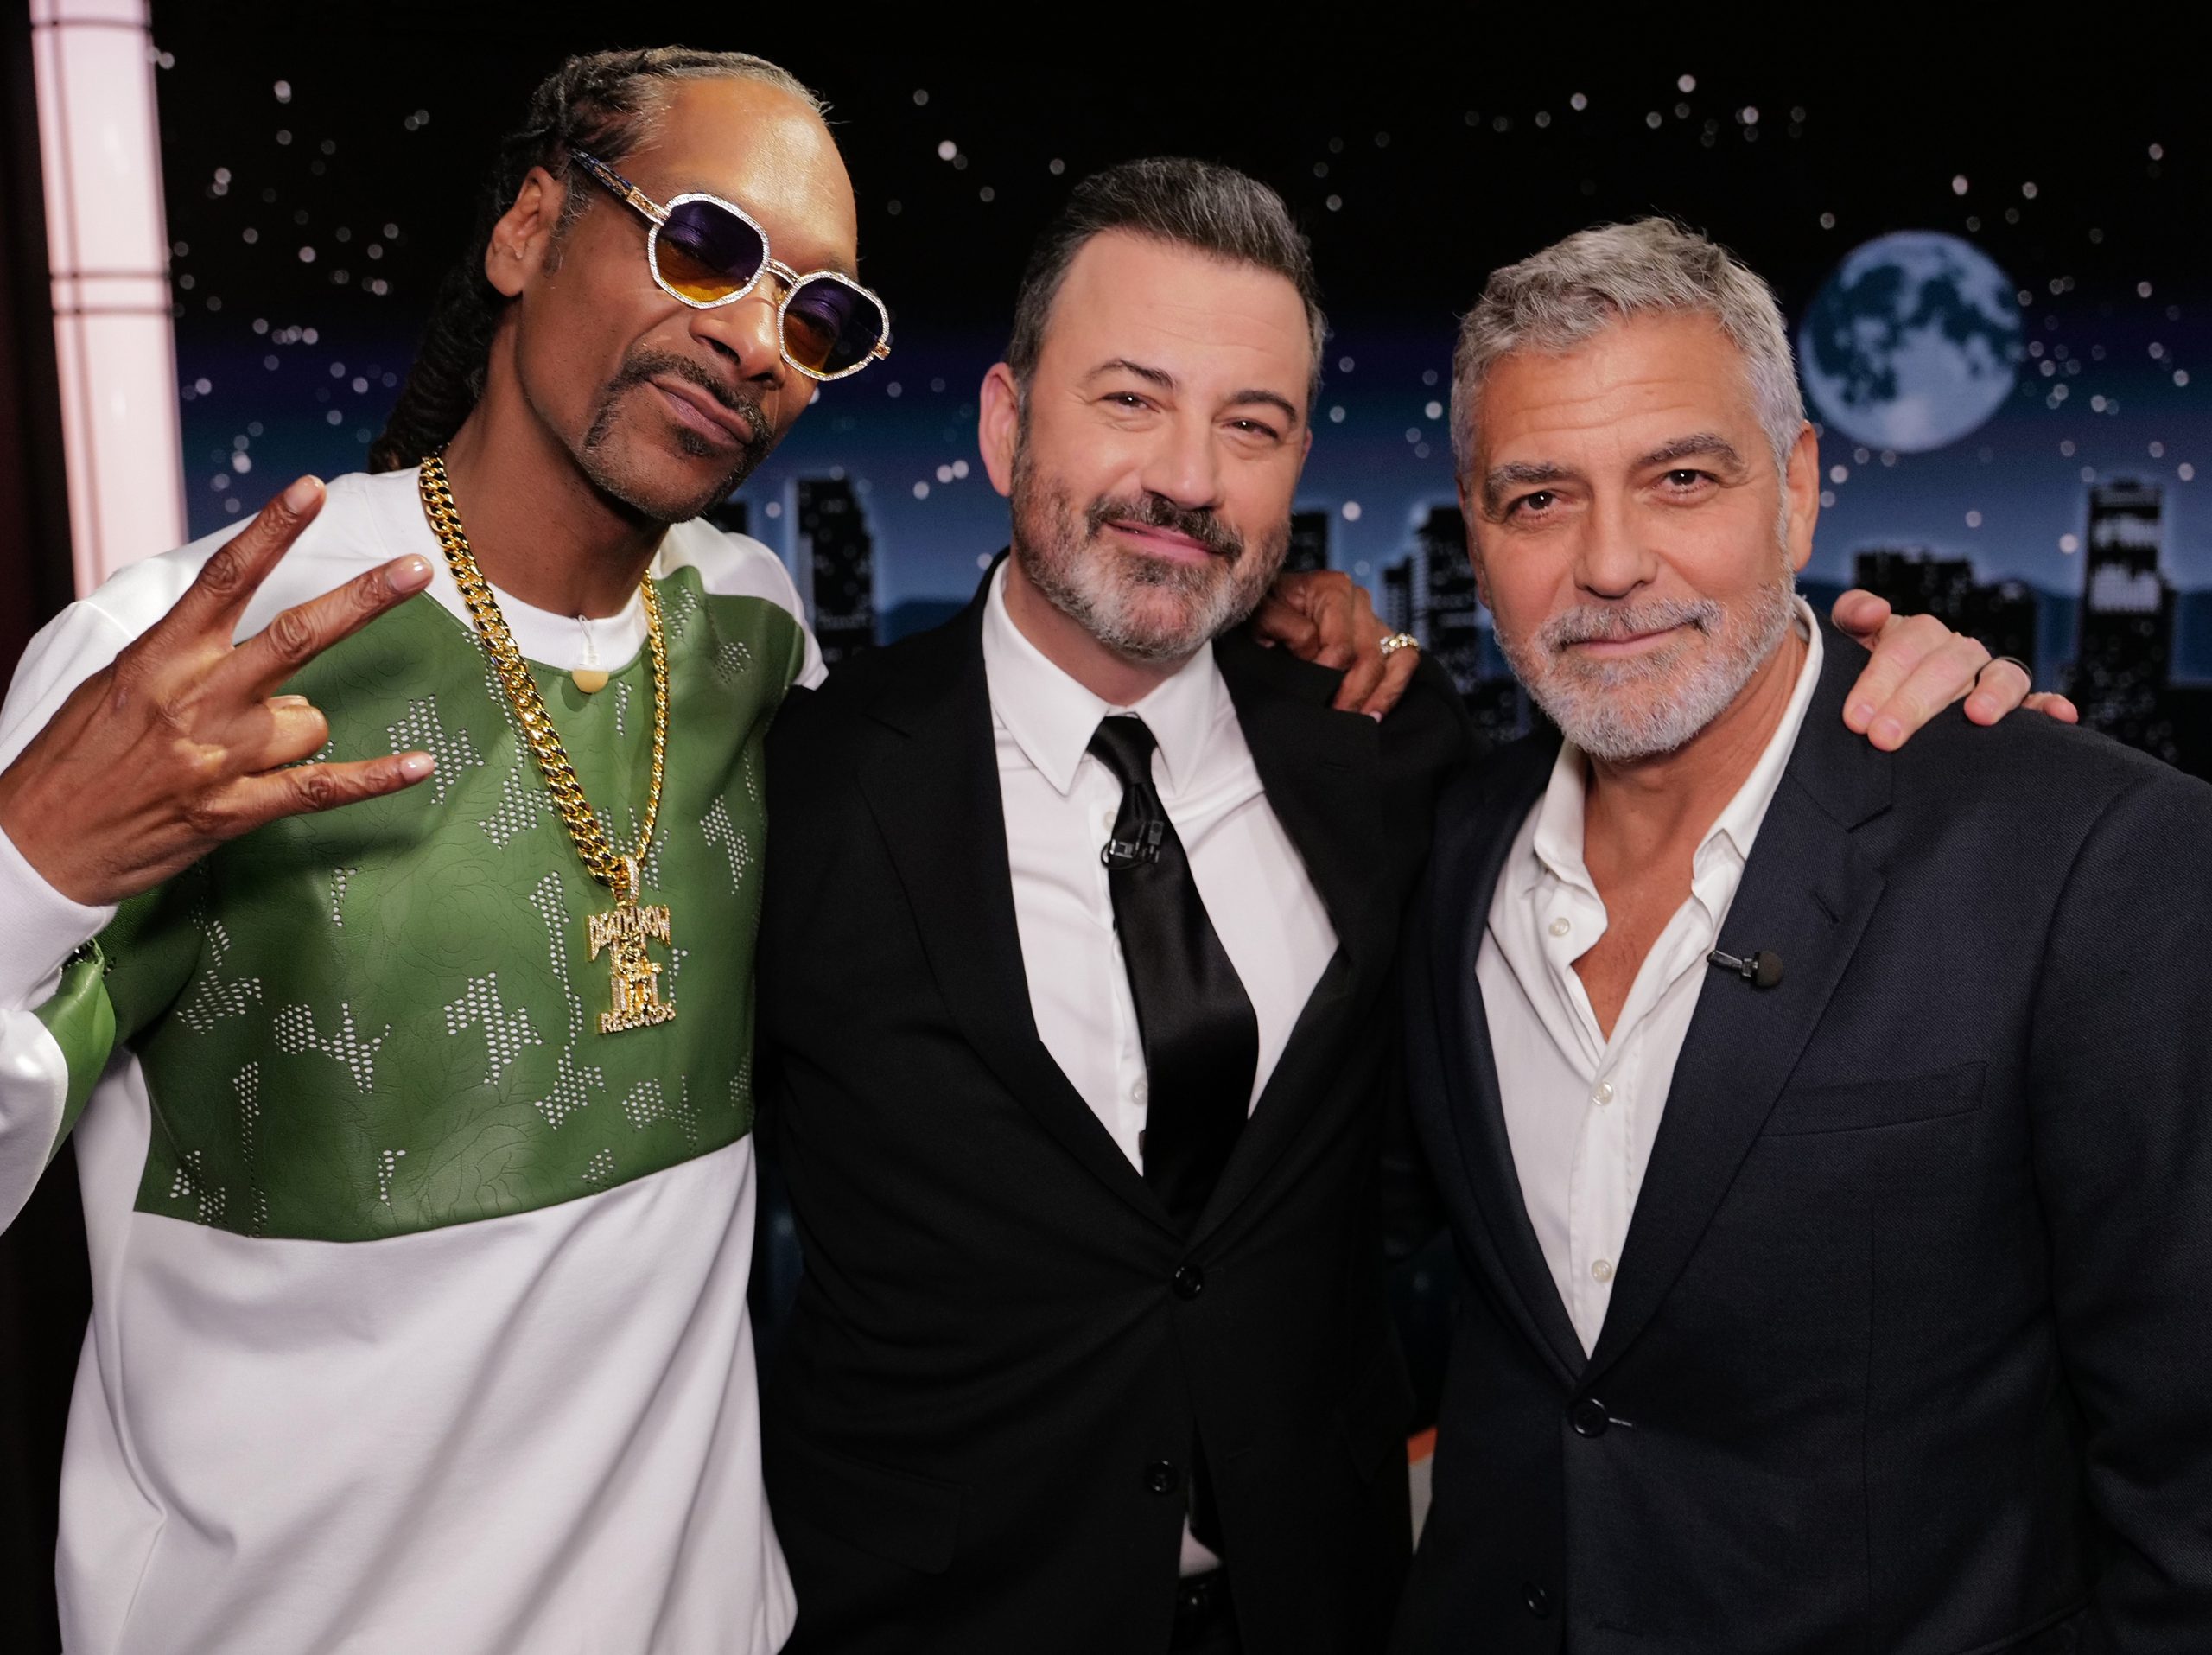 Snoop Dogg, George Clooney And Musical Guest Celebrate 20 Years With ‘Jimmy Kimmel’